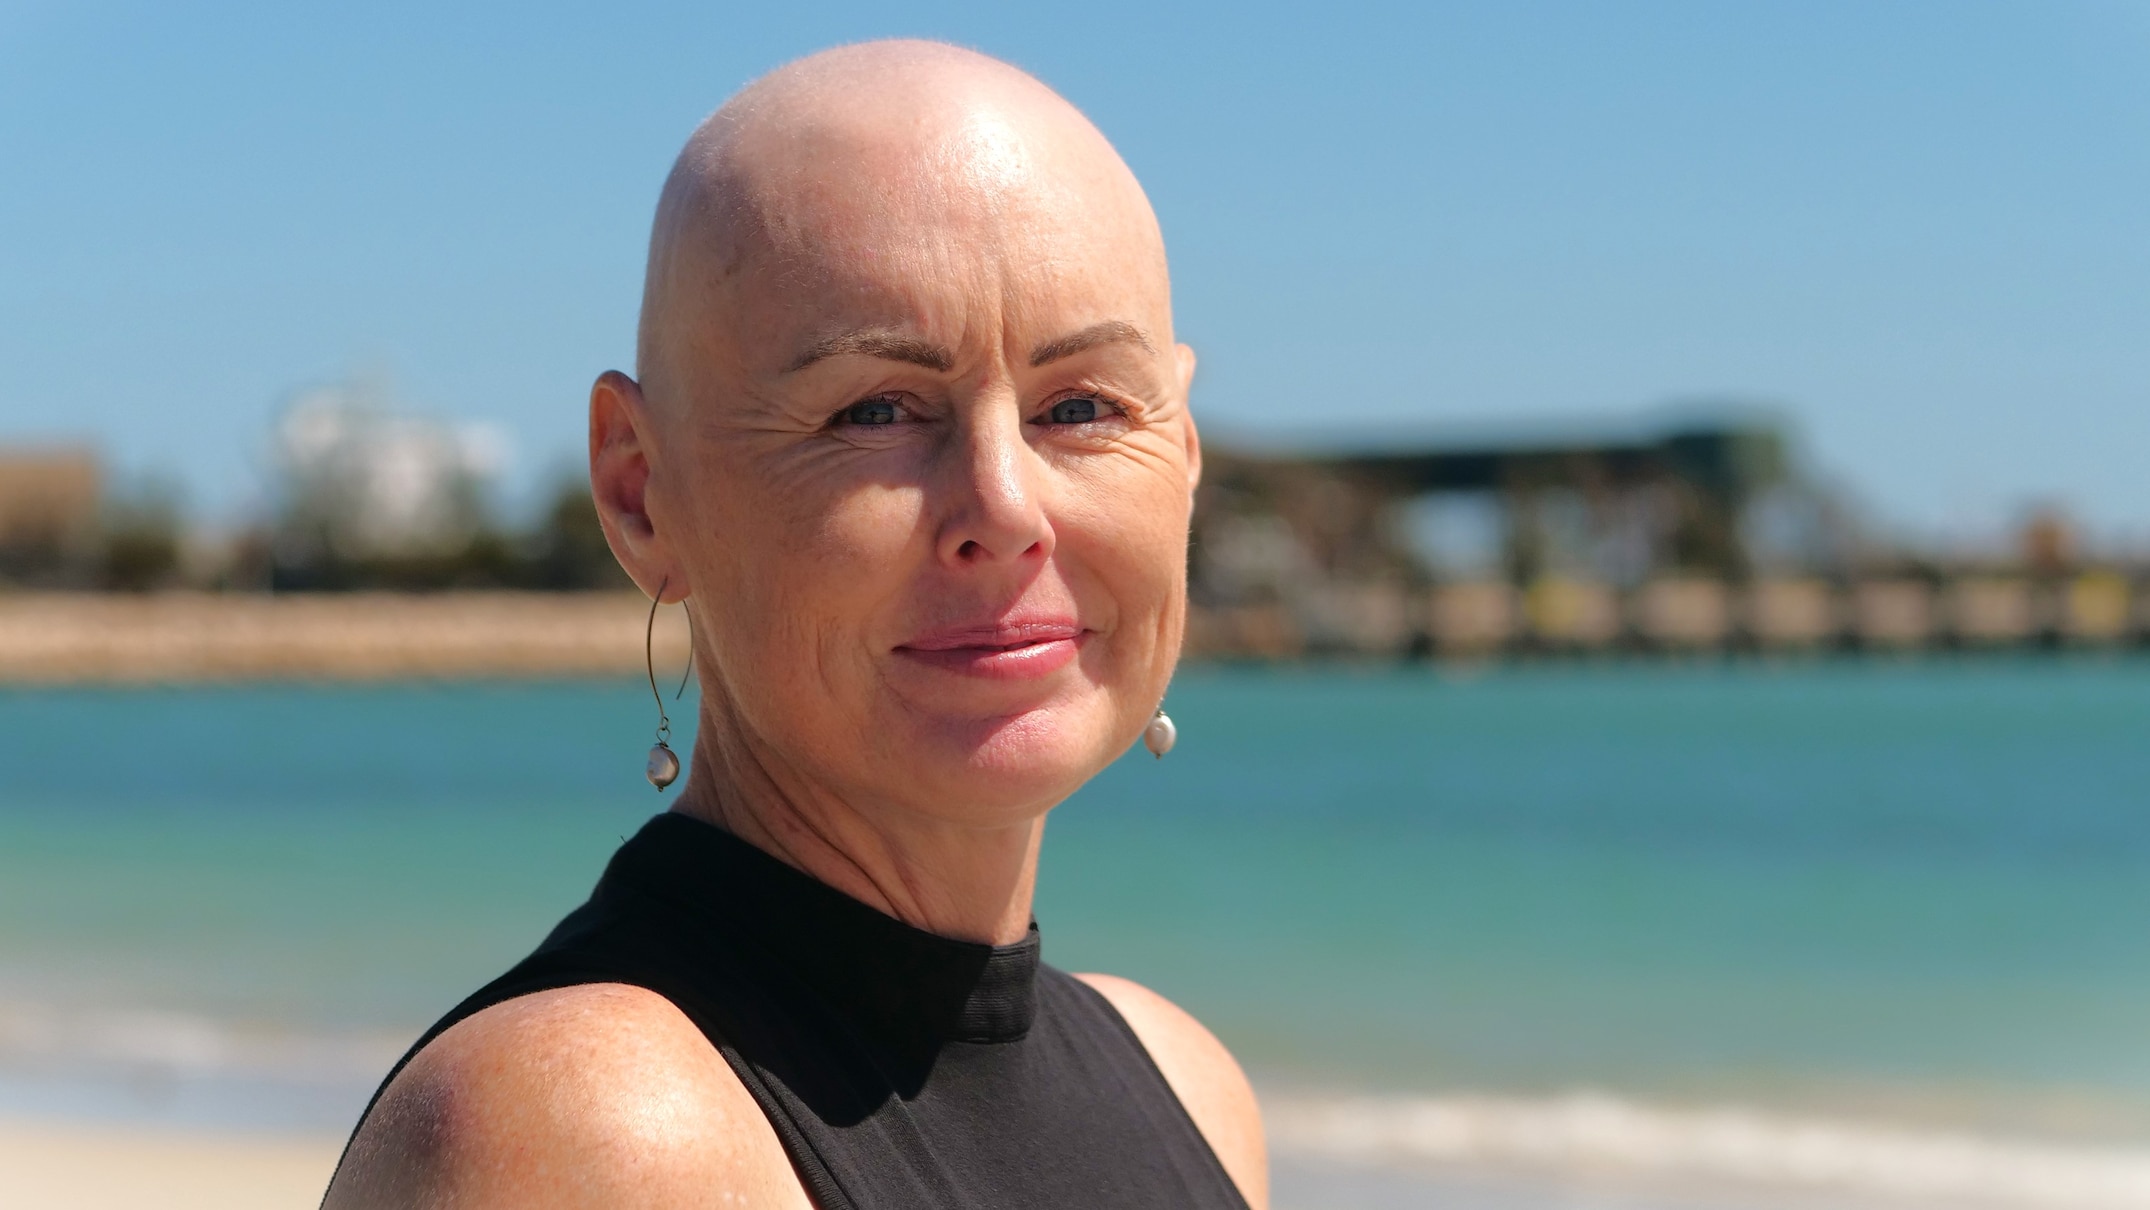 geraldton mother's breast cancer diagnosis highlights importance of screening buses in regions